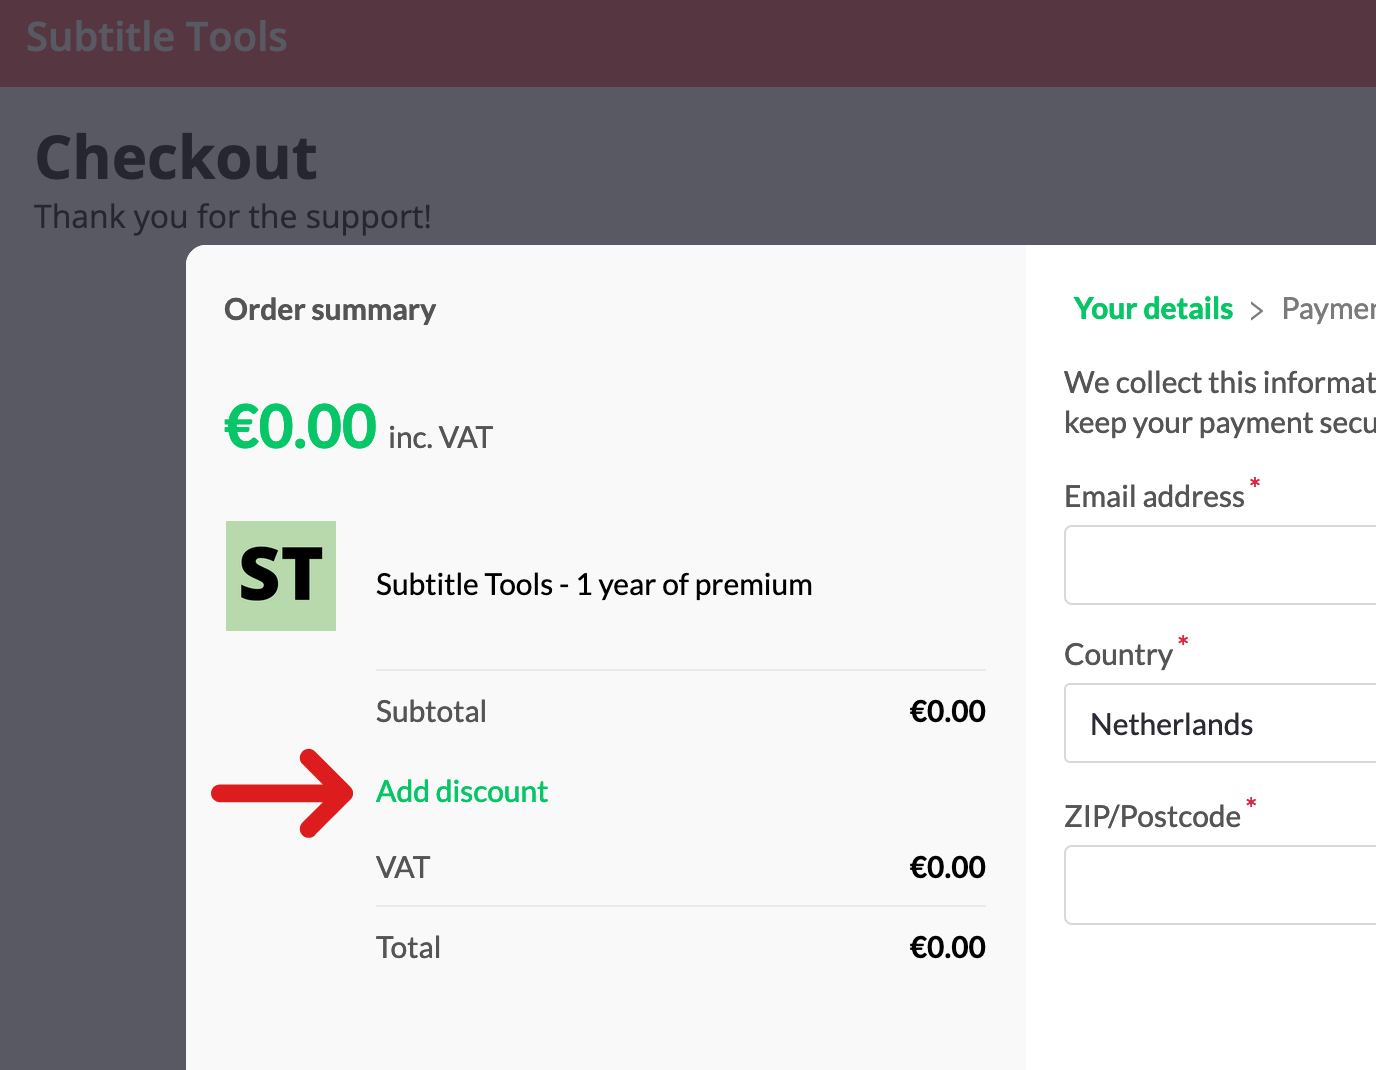 Arrow pointing to the add discount button